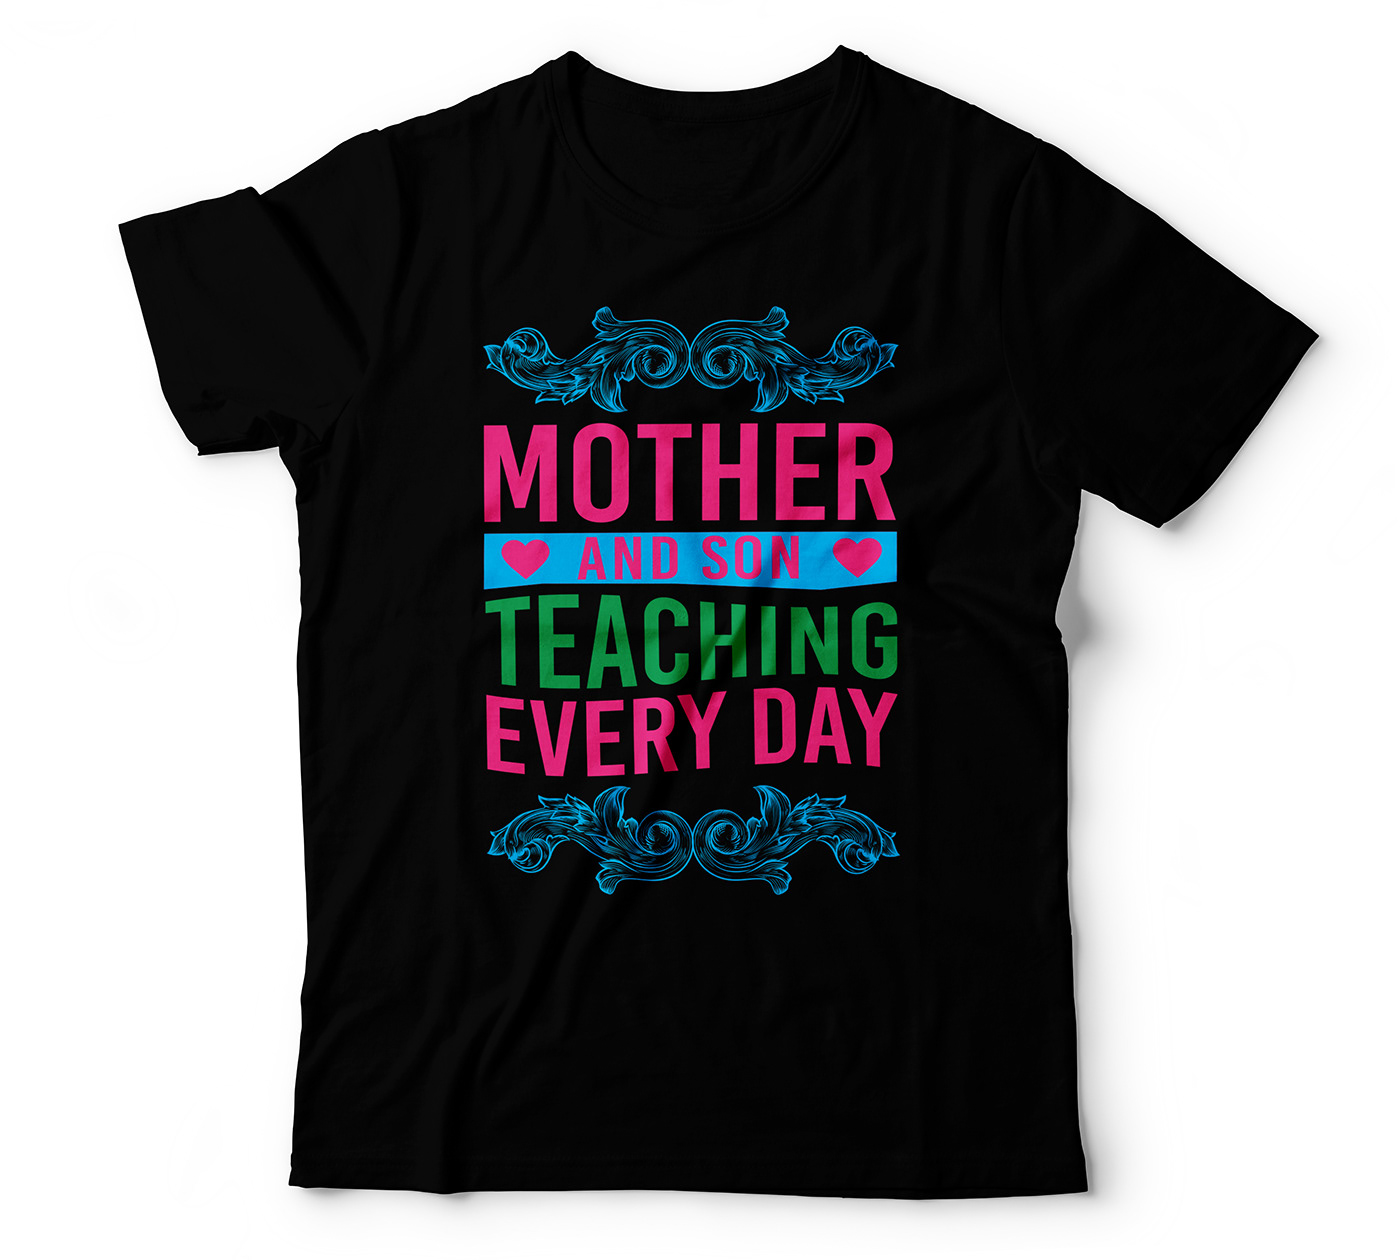 FAMILY T SHIRT. FUNNY MOM T SHIRT. love. MOM BIRTHDAY. mom t shirt MOTHER AND SON . MOTHER DAY GIFT. MOTHER LOVER. MOTHER T SHIRT. SON T SHIRT.